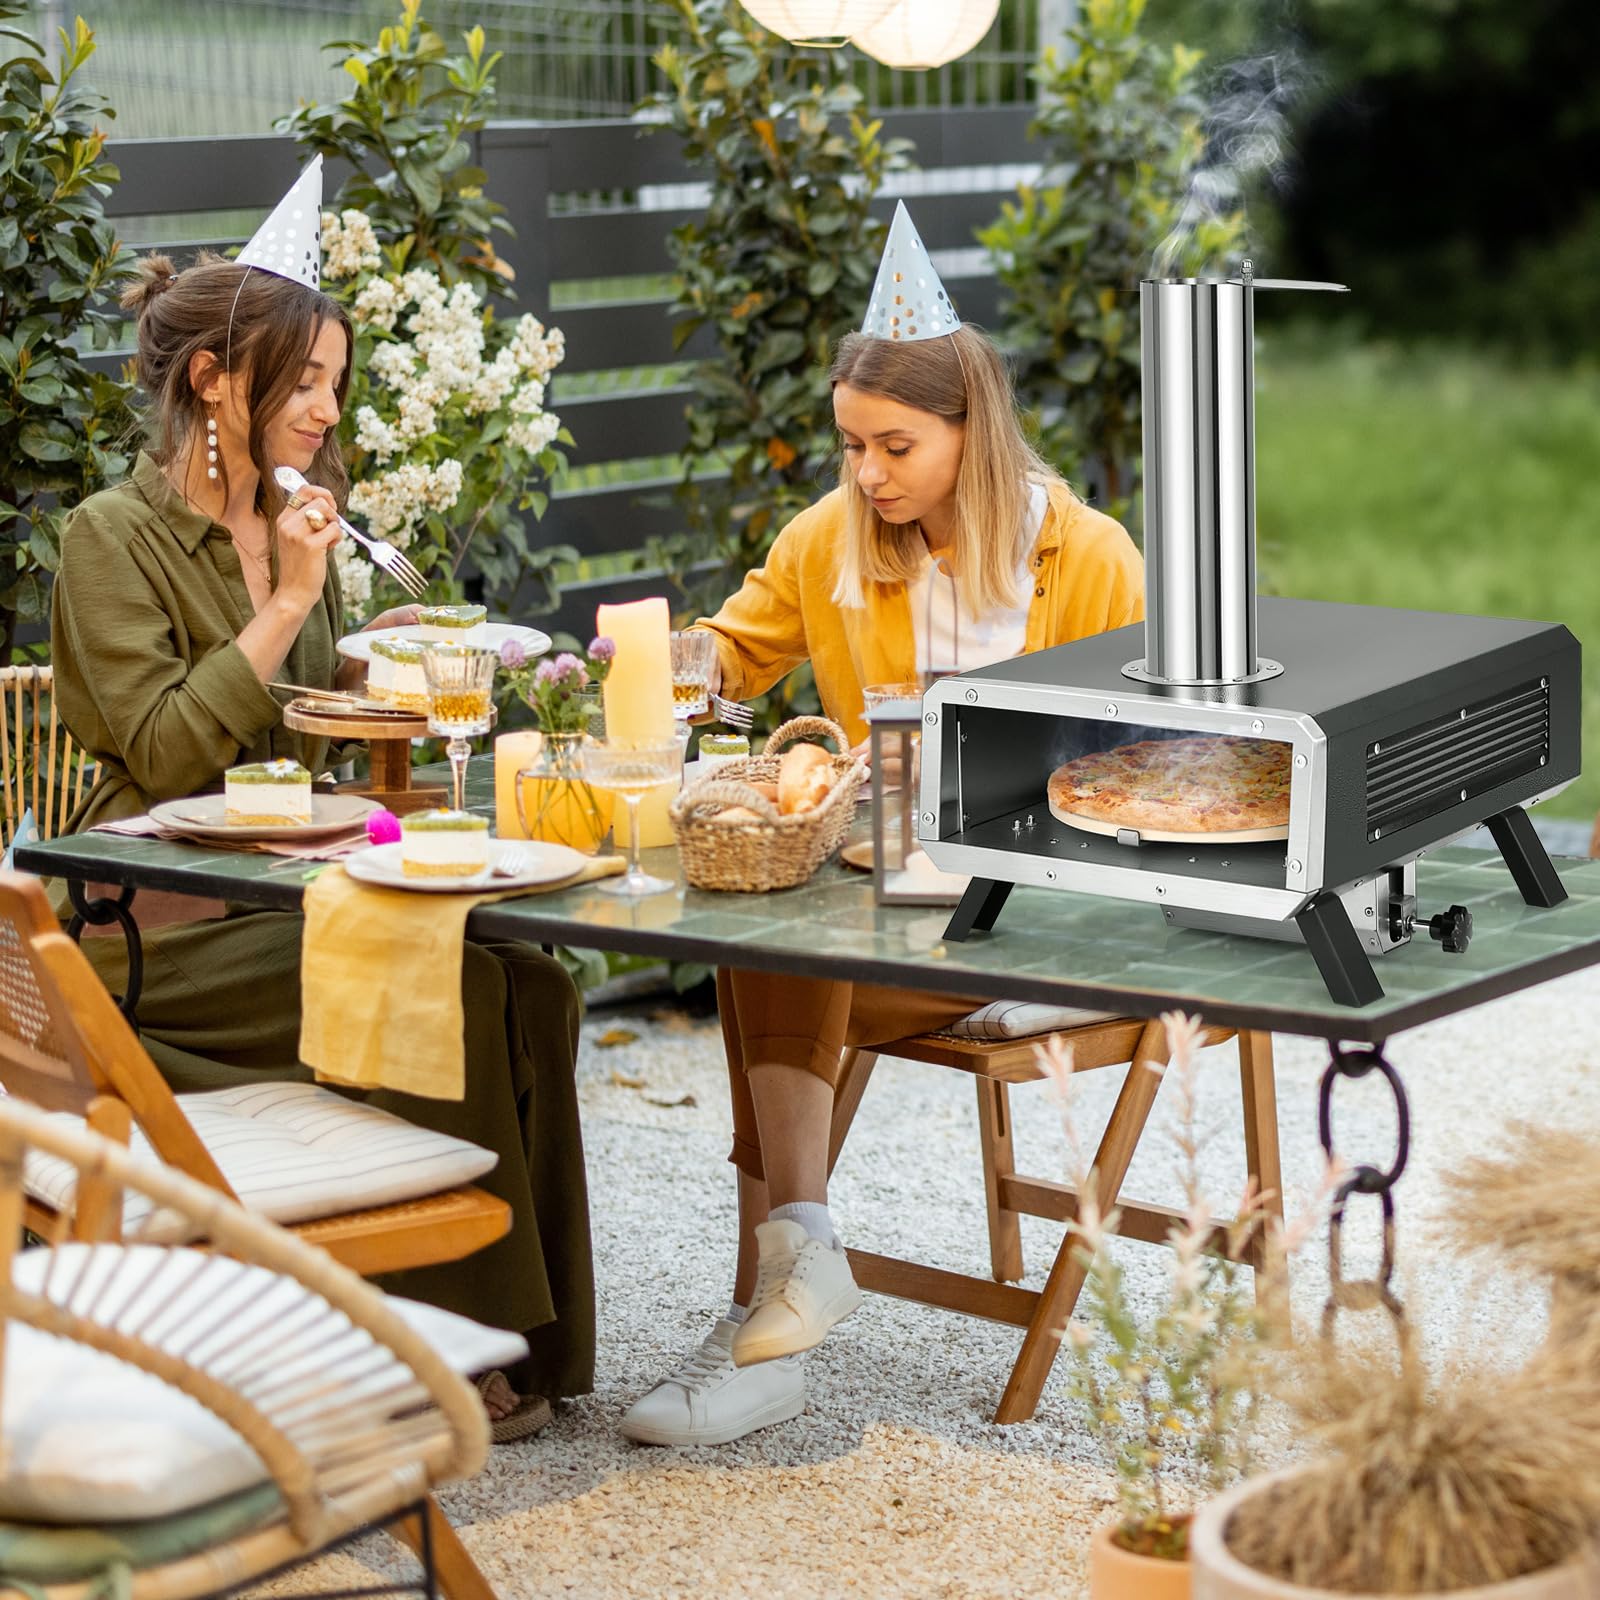 Giantex Pizza Oven Outdoor - 360° Rotating Pizza Stone